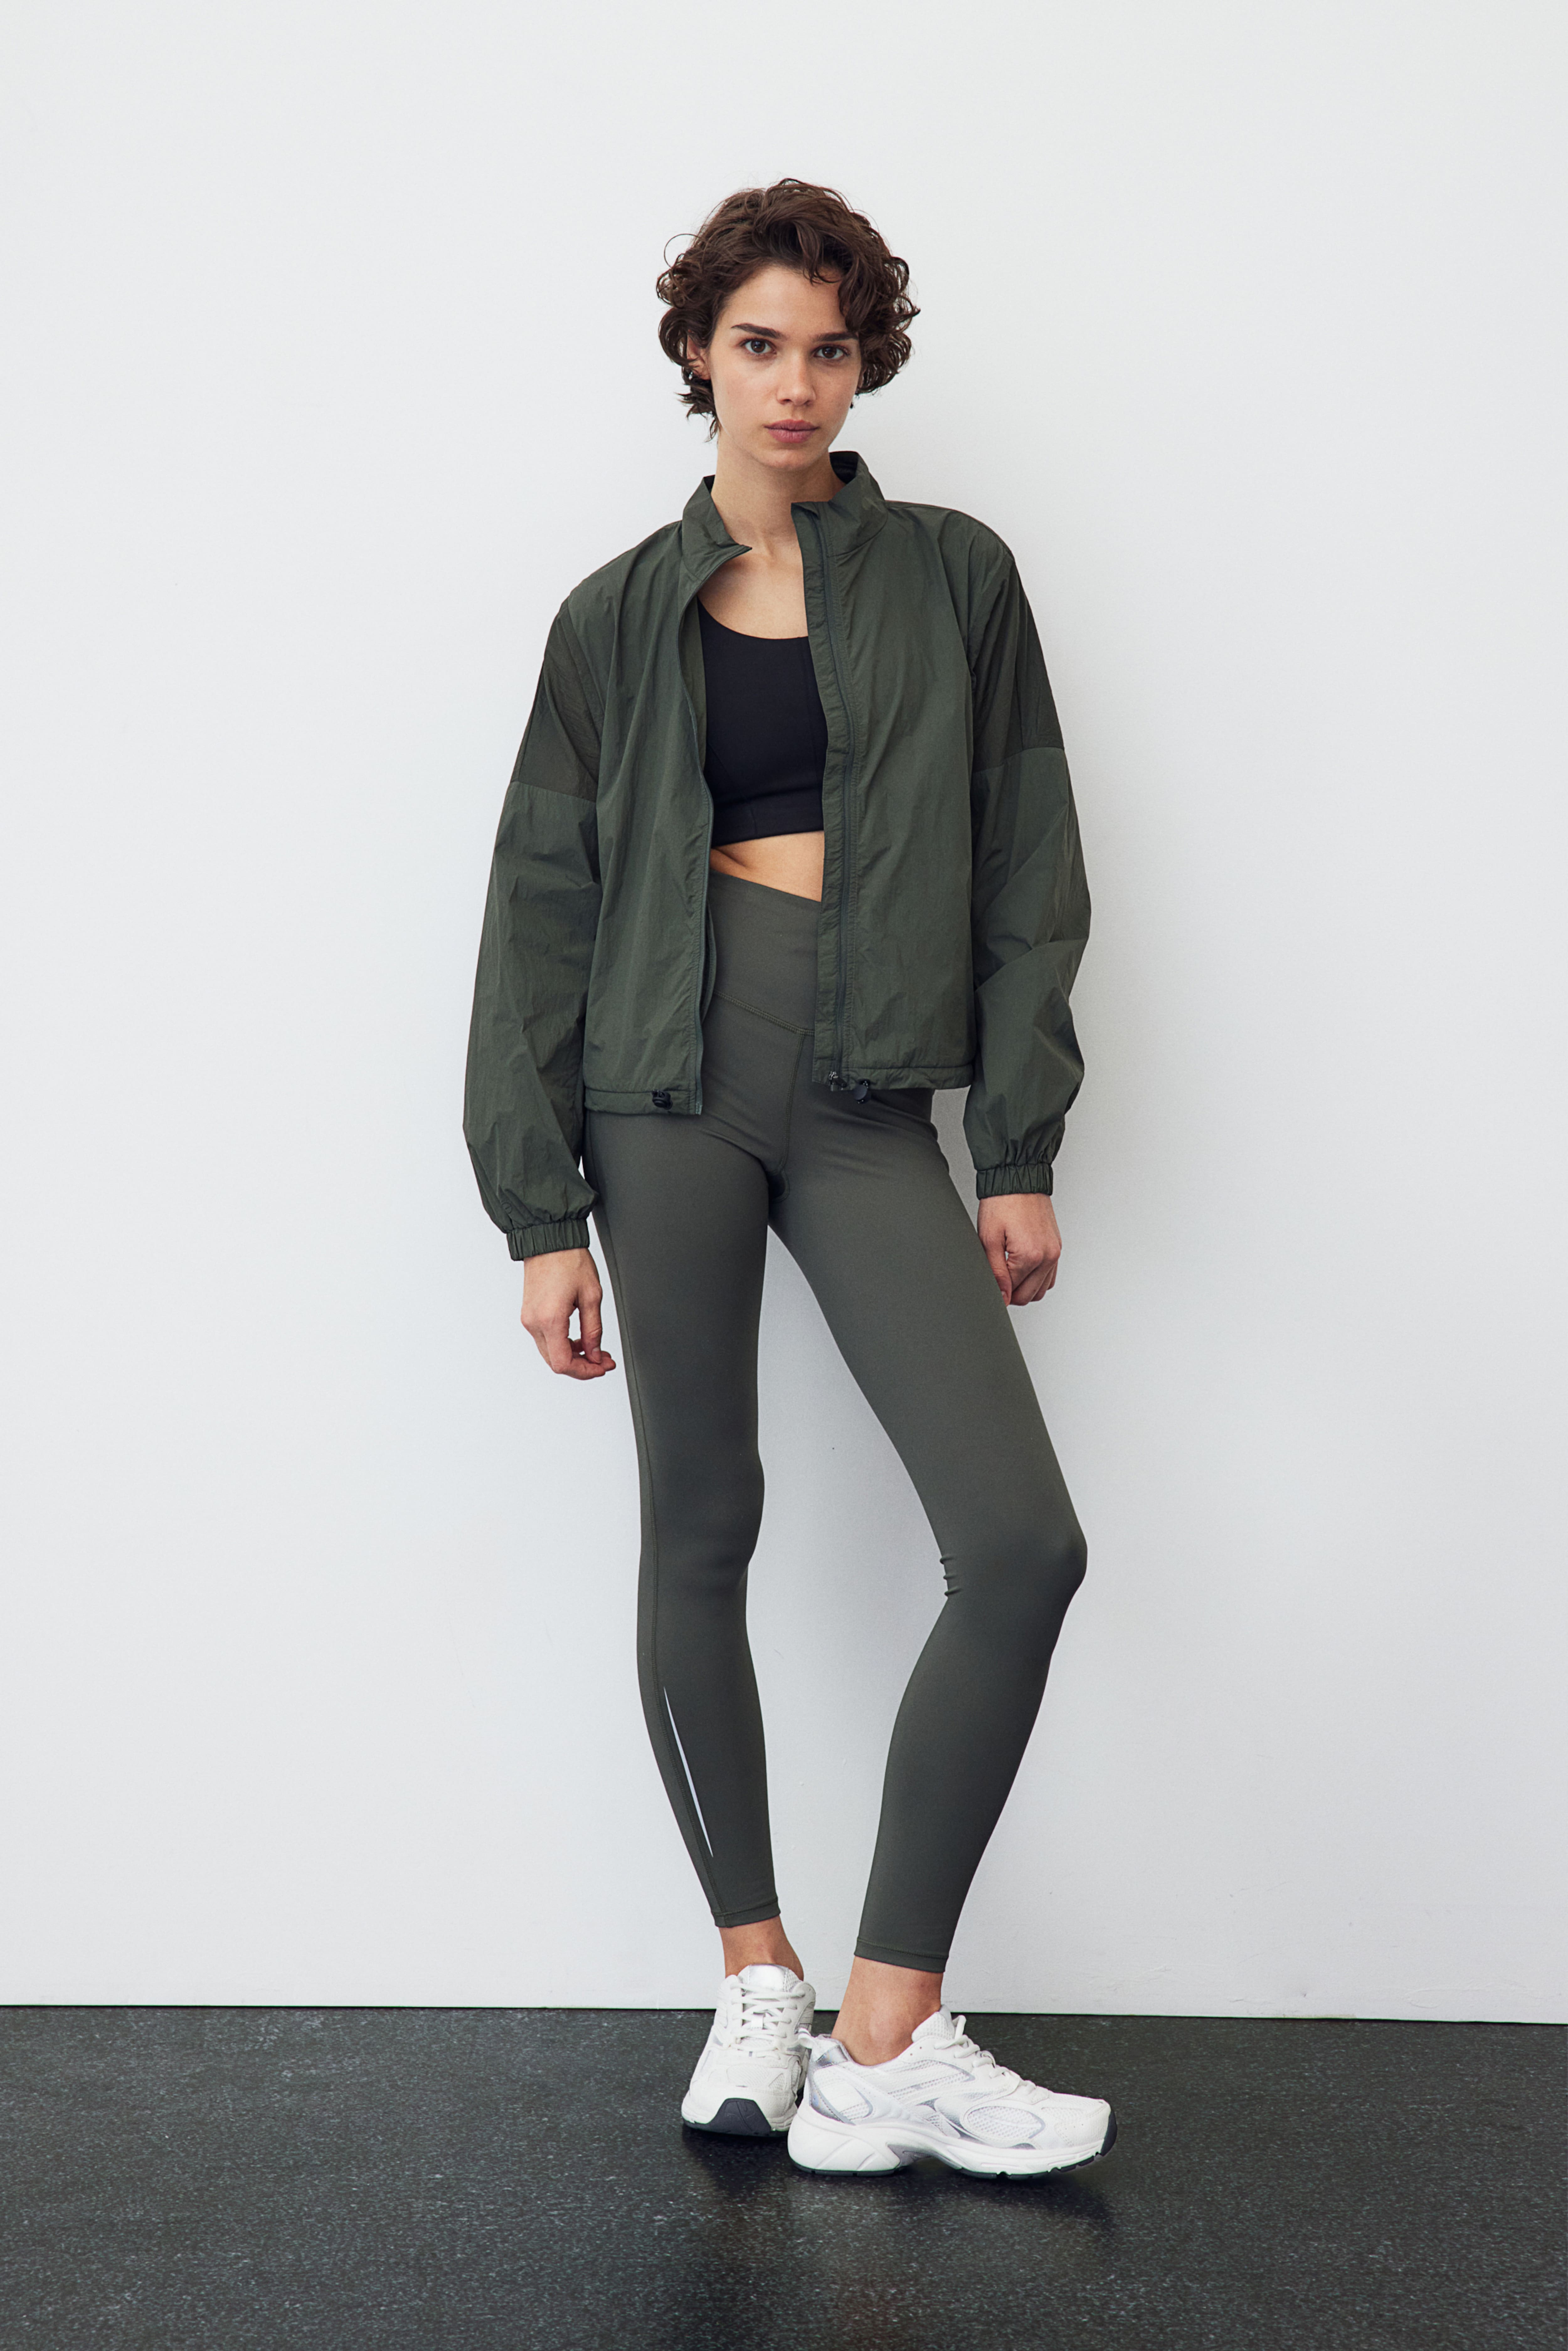 Women's Sports Outerwear | Jackets, Thermals & More | H&M US